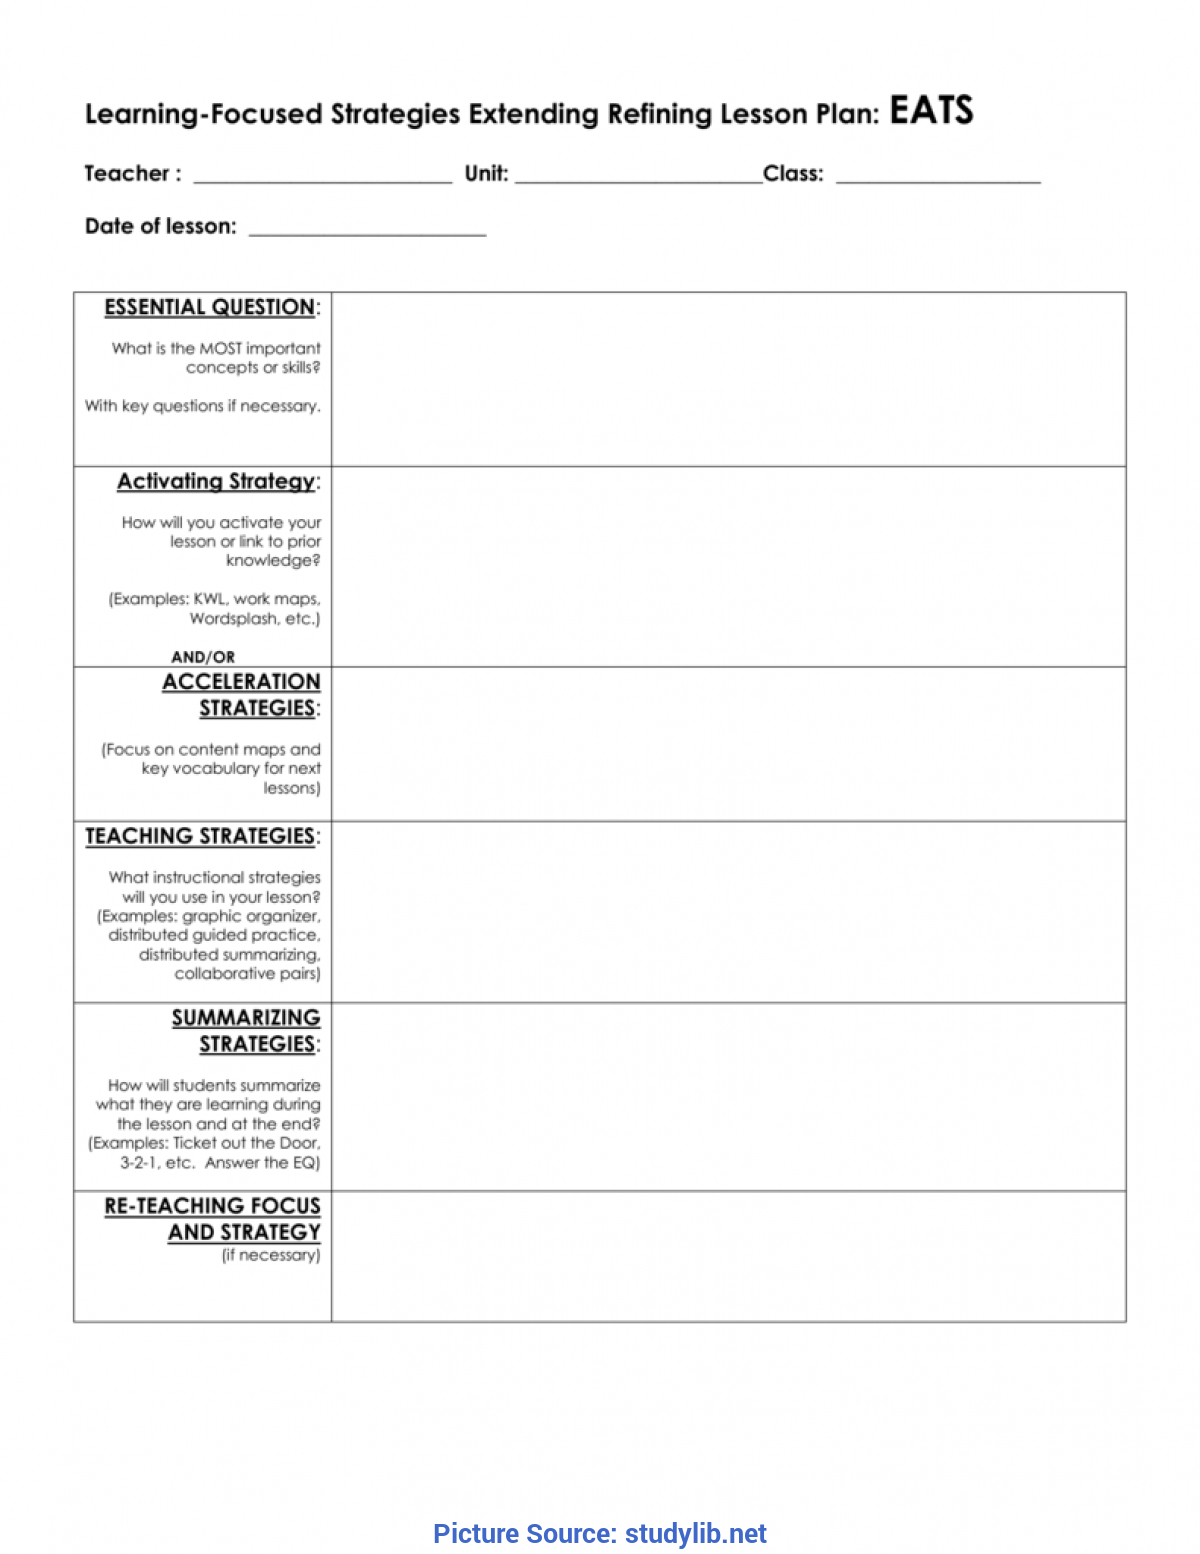 Complex Lesson Plan Template Learning Focused Eats Lesson In Learning Focused Lesson Plan Template